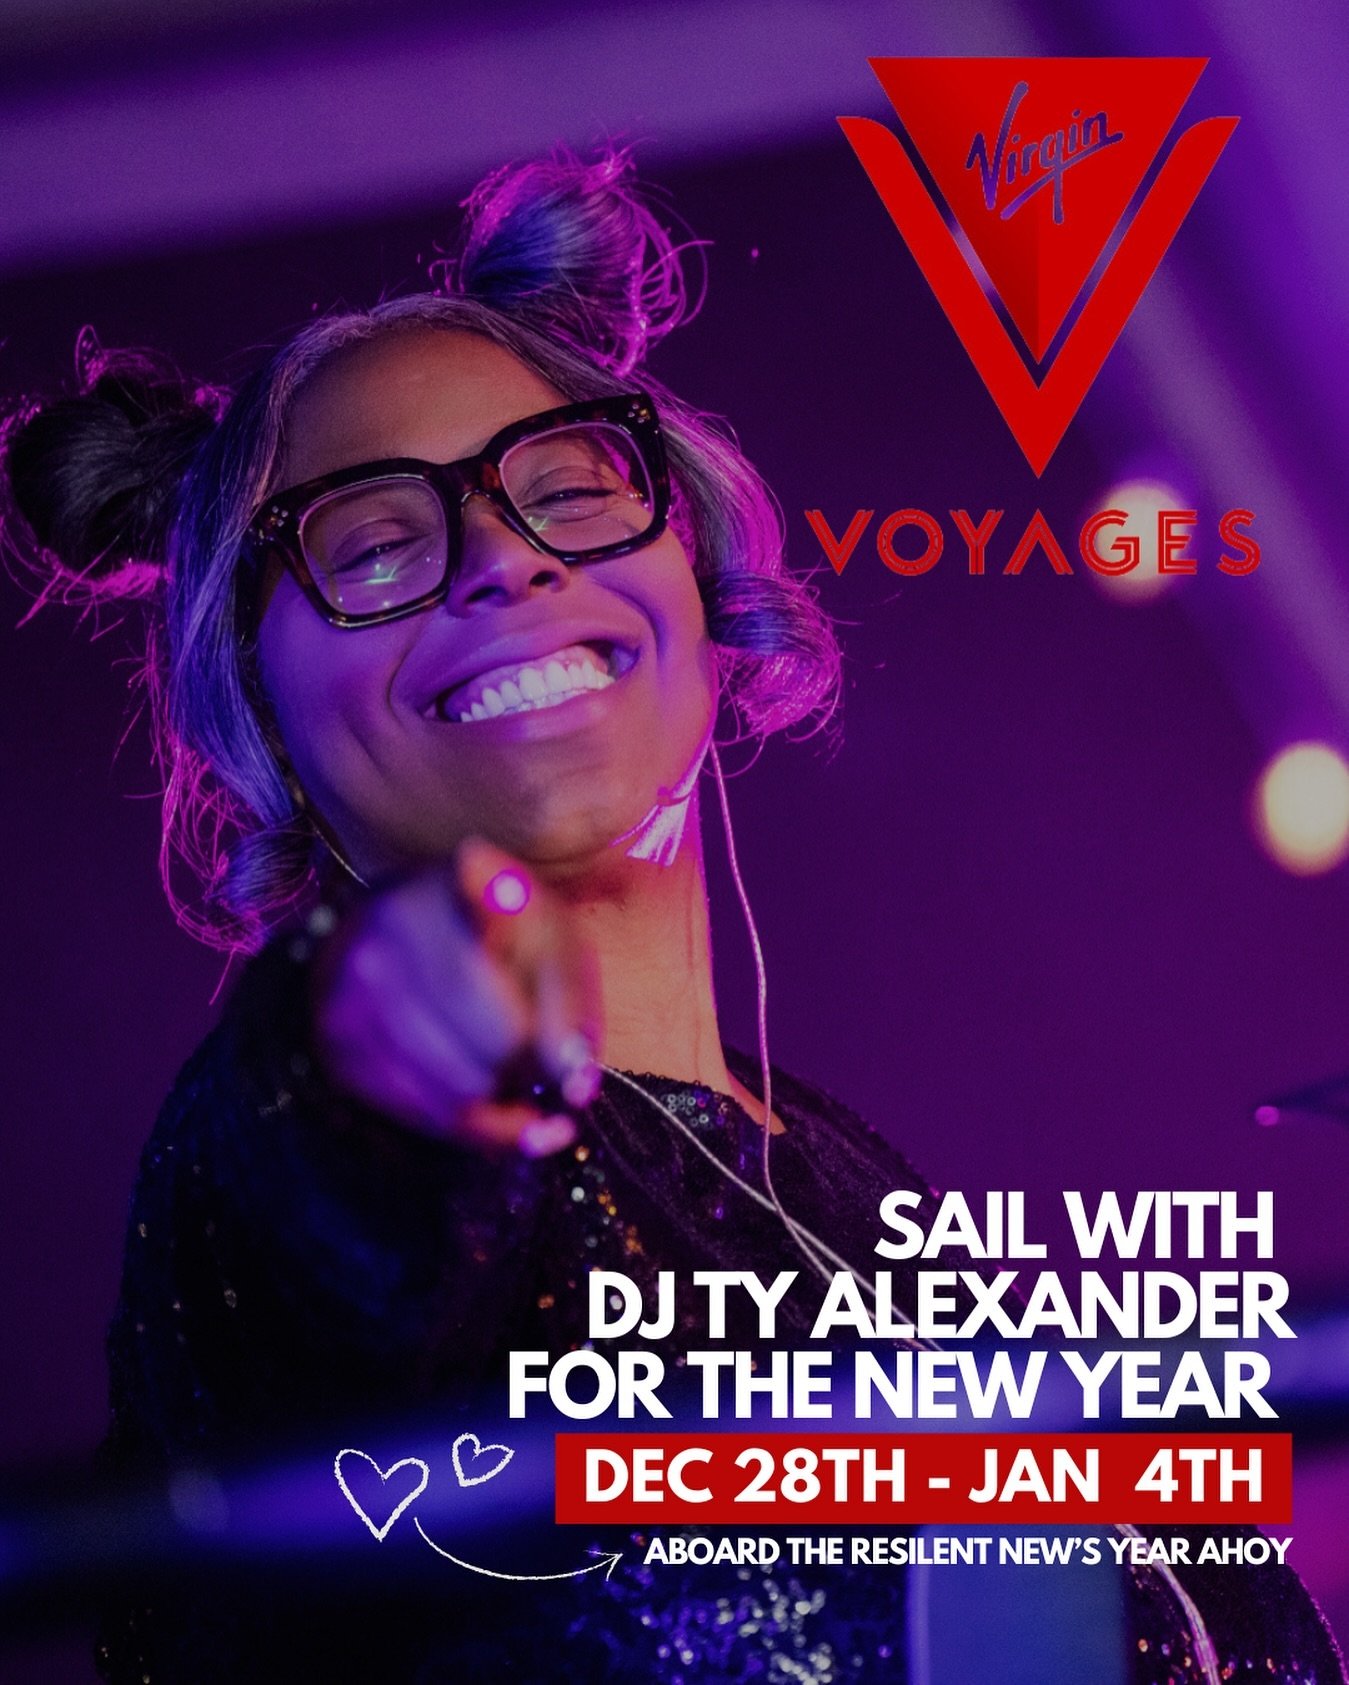 *Squeals* this one was not on my list but I&rsquo;m happy to have the opportunity to deejay for Virgin Voyages this holiday szn. SOOOOOO this is me giving you plenty of notice in case you wanna sail with me for the New Year. ⁣
⁣
✨Type &ldquo;NYE&rdqu